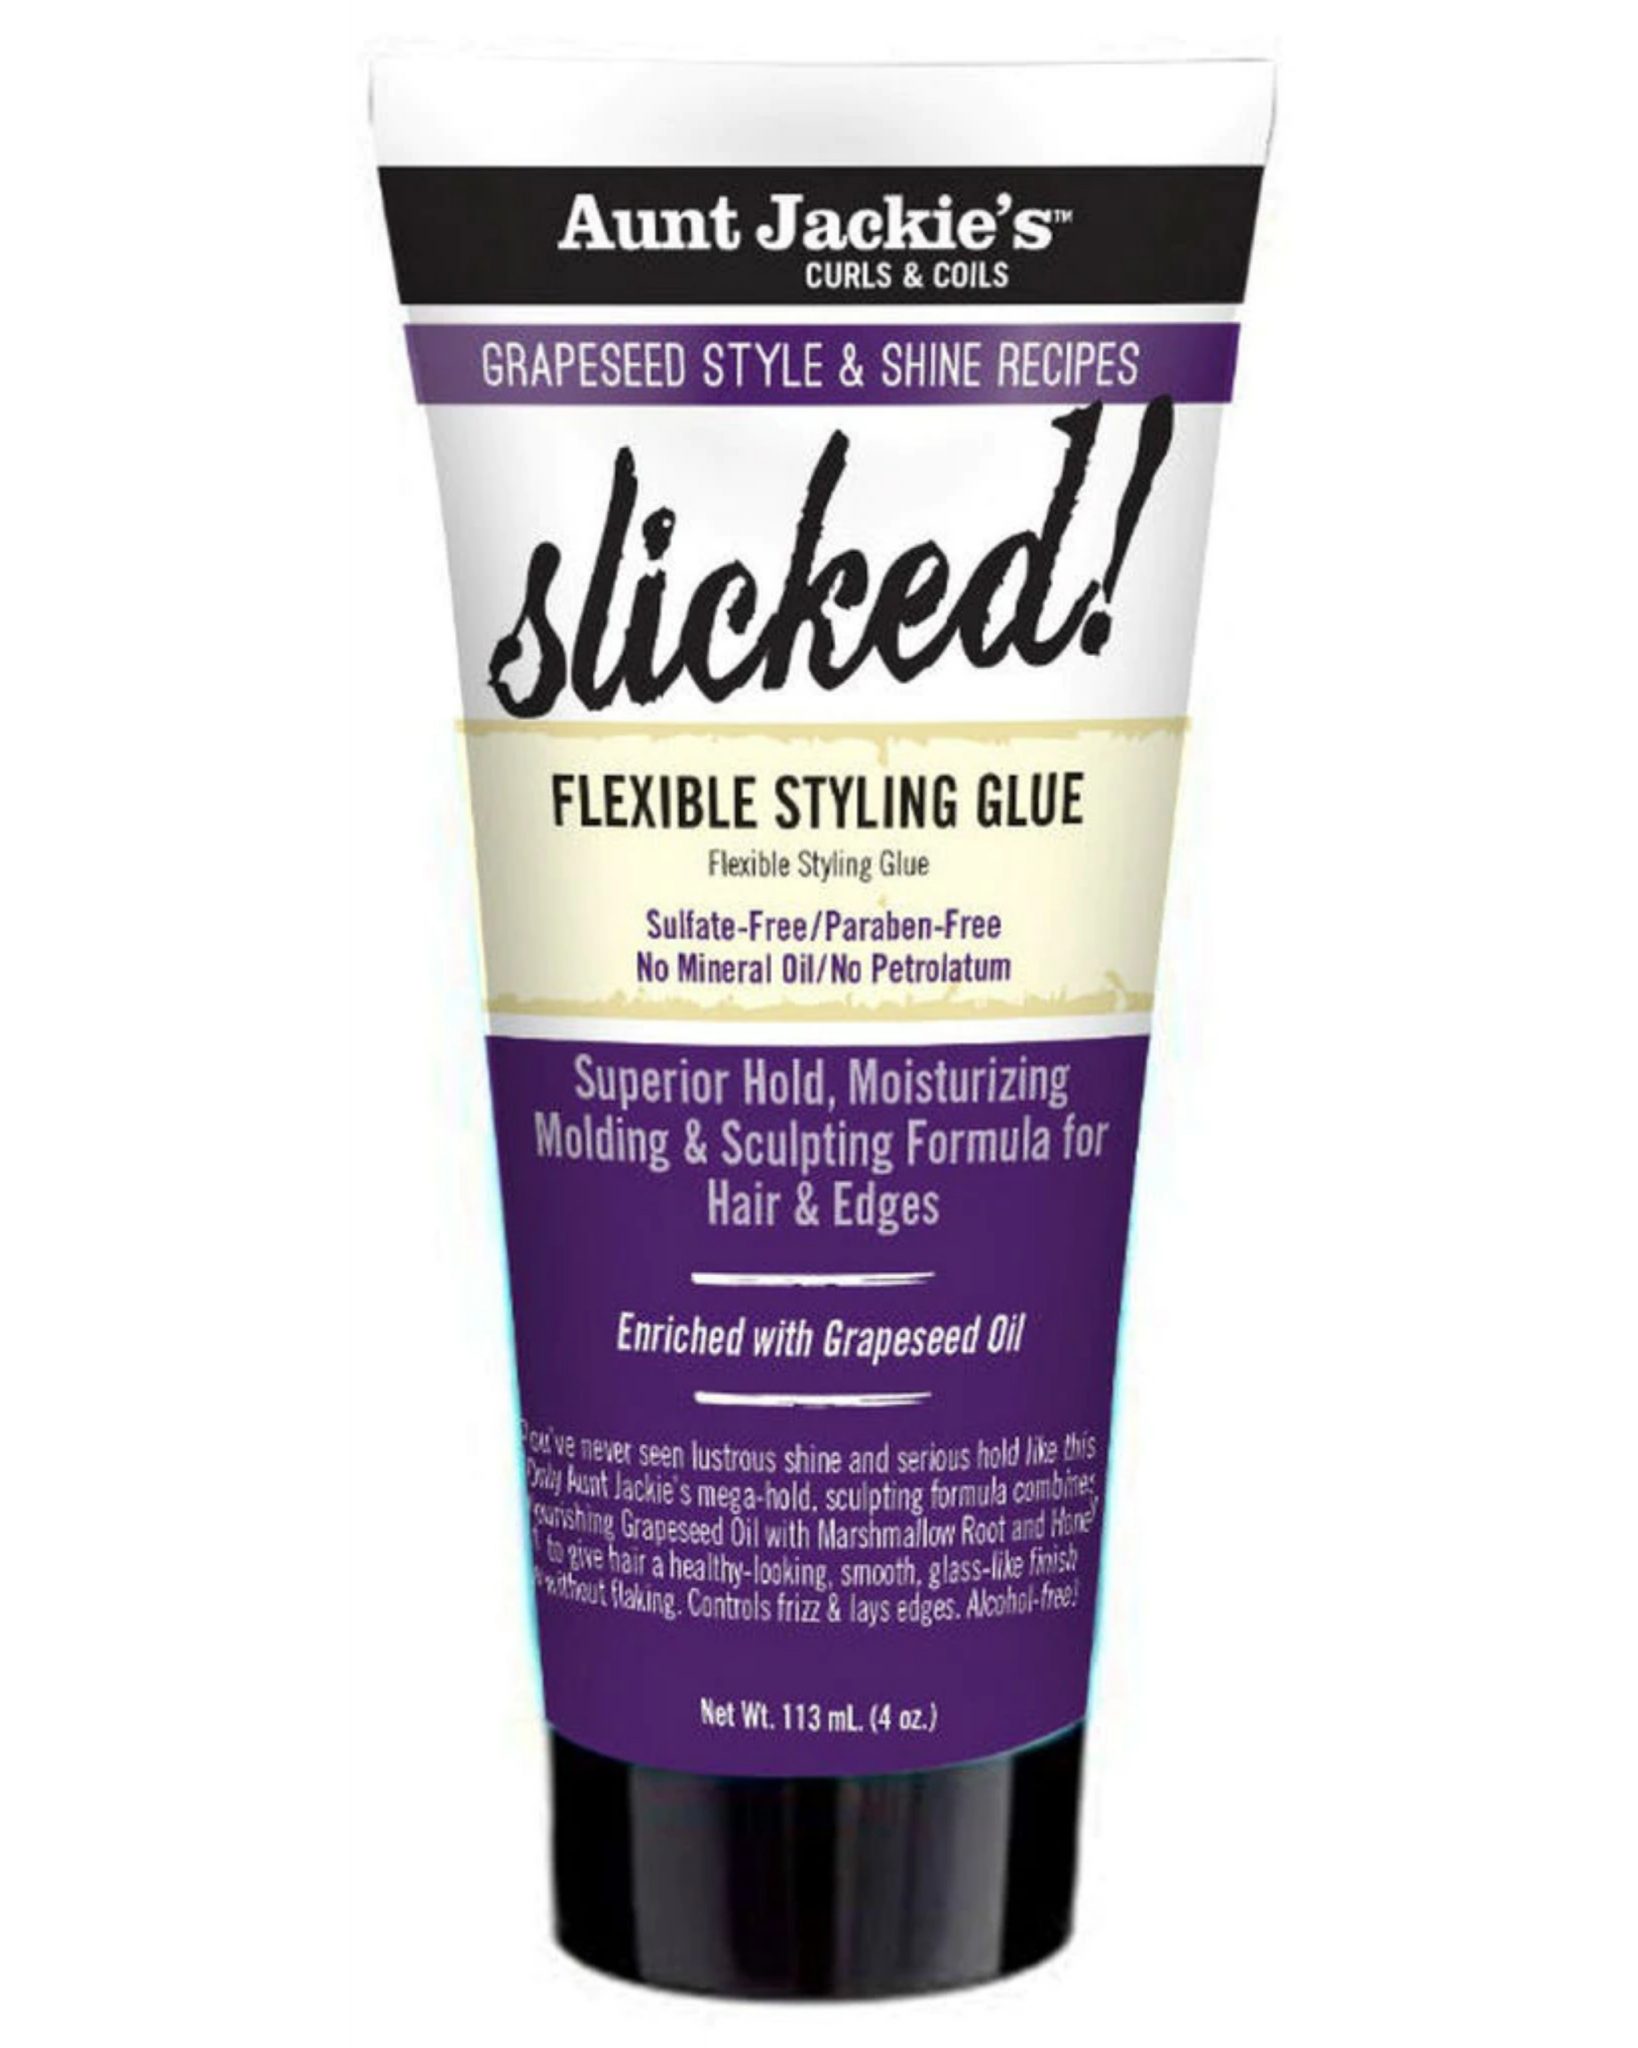 Aunt Jackie’s Grapeseed Style & Shine Recipes SLICKED! Flexible Styling Glue